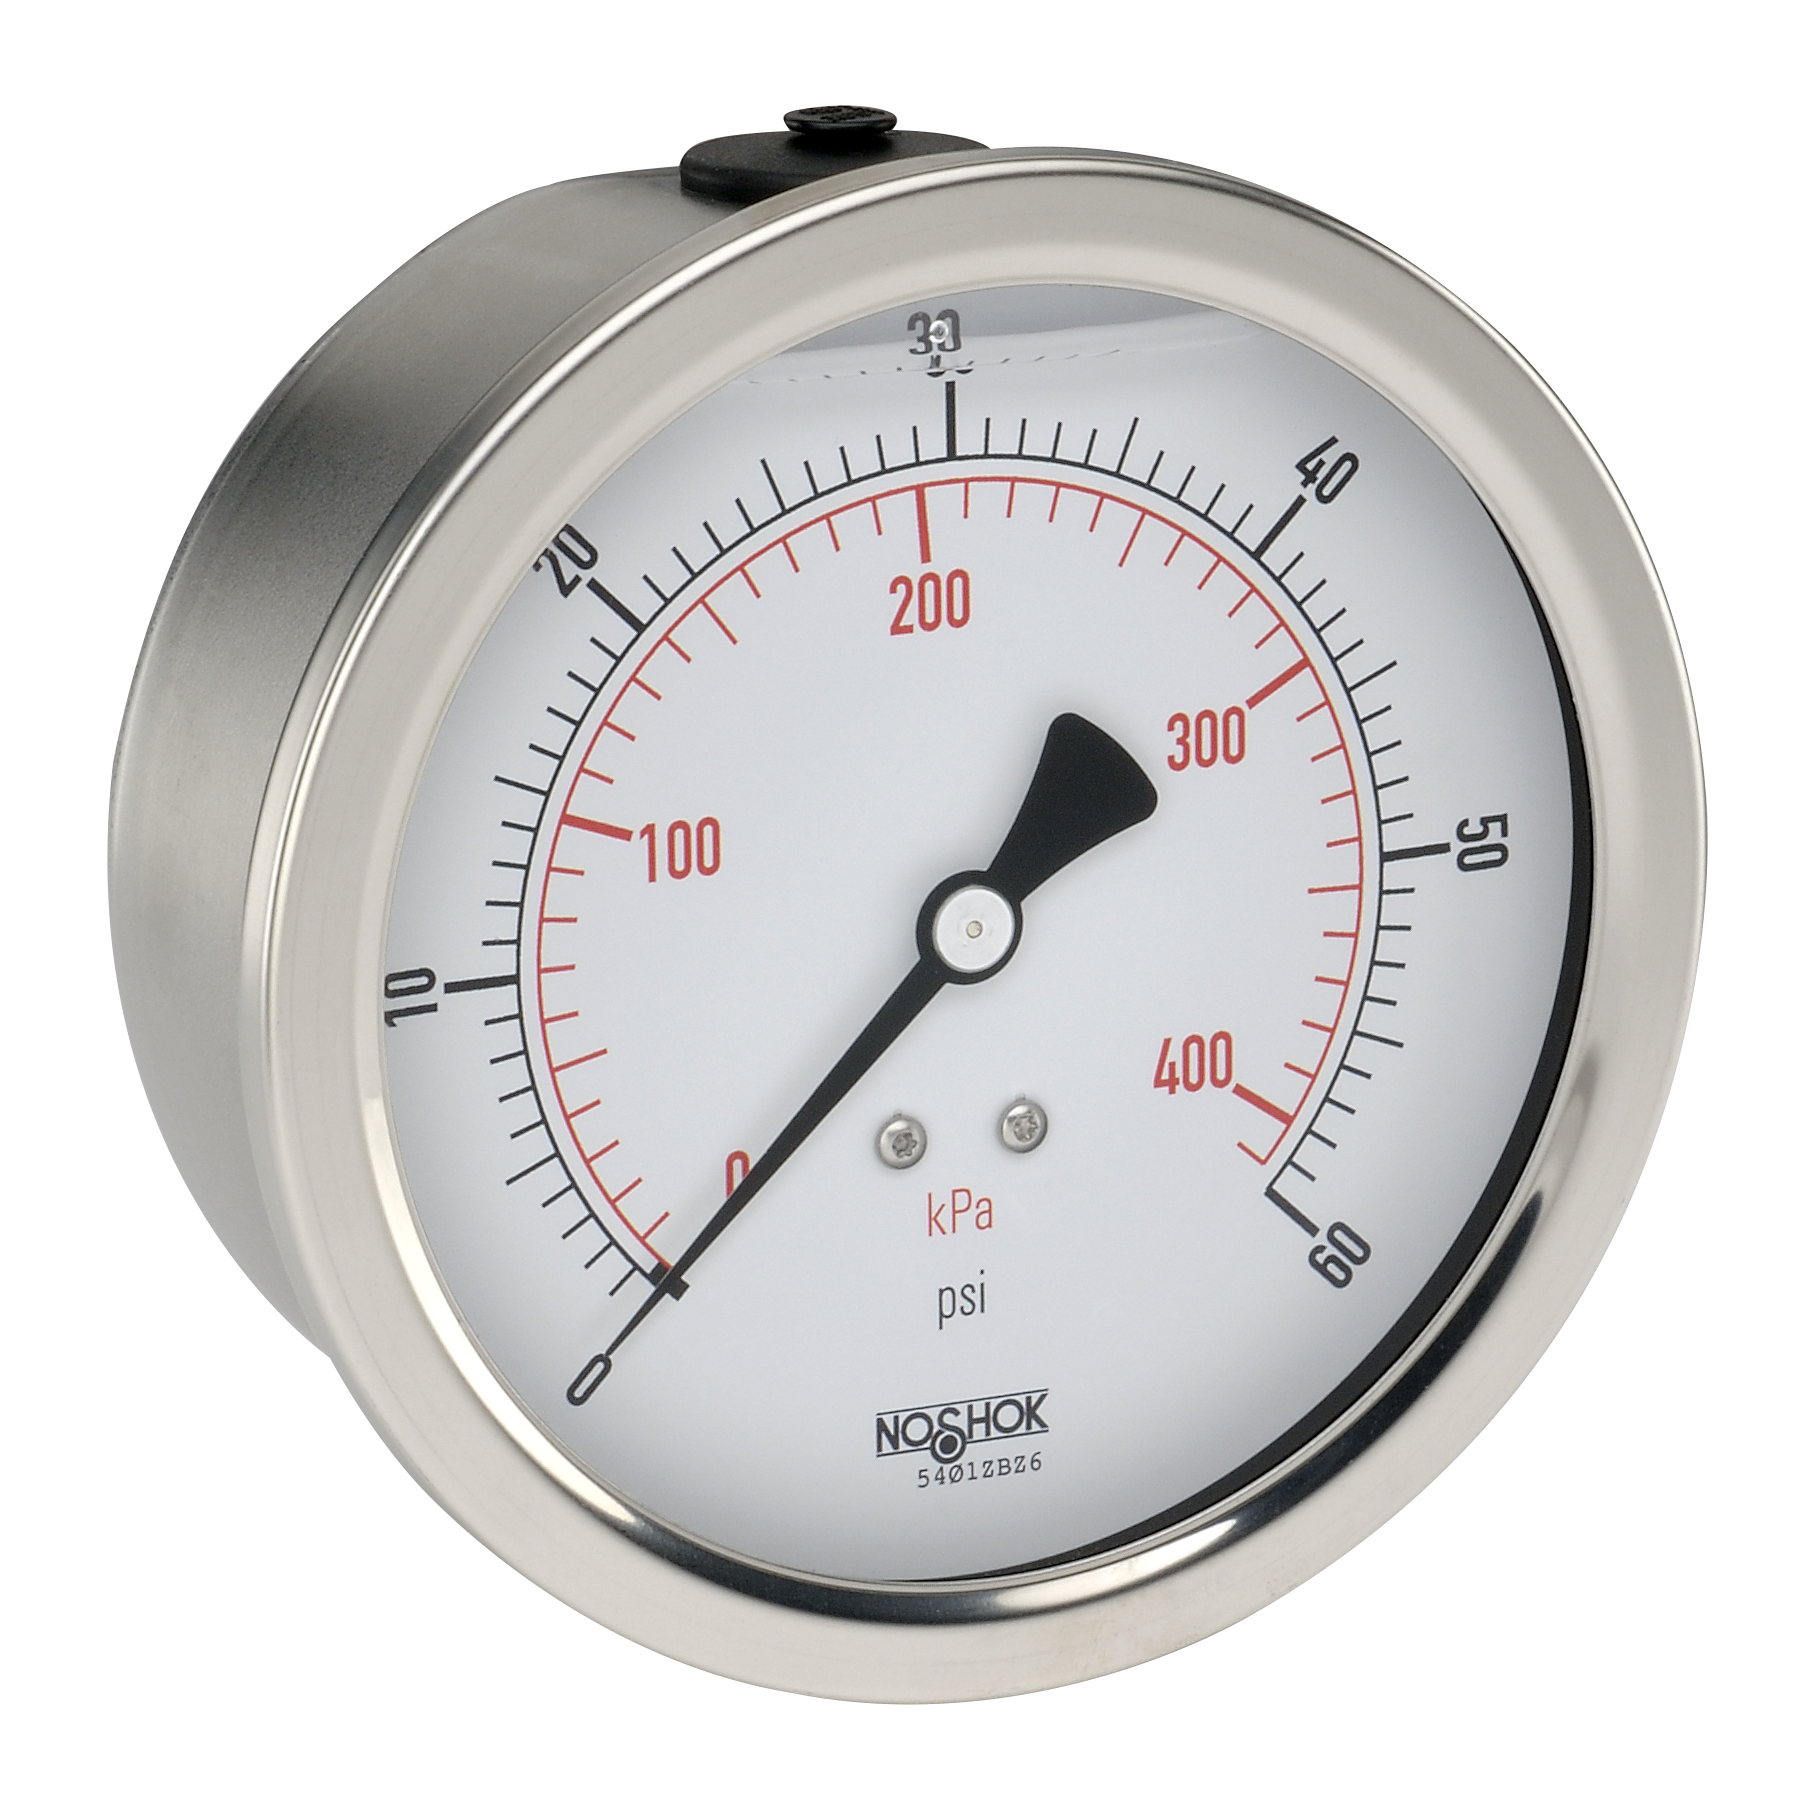 40-911-1500-psi/bar 900 Series ABS and Stainless Steel Liquid Filled Pressure Gauges